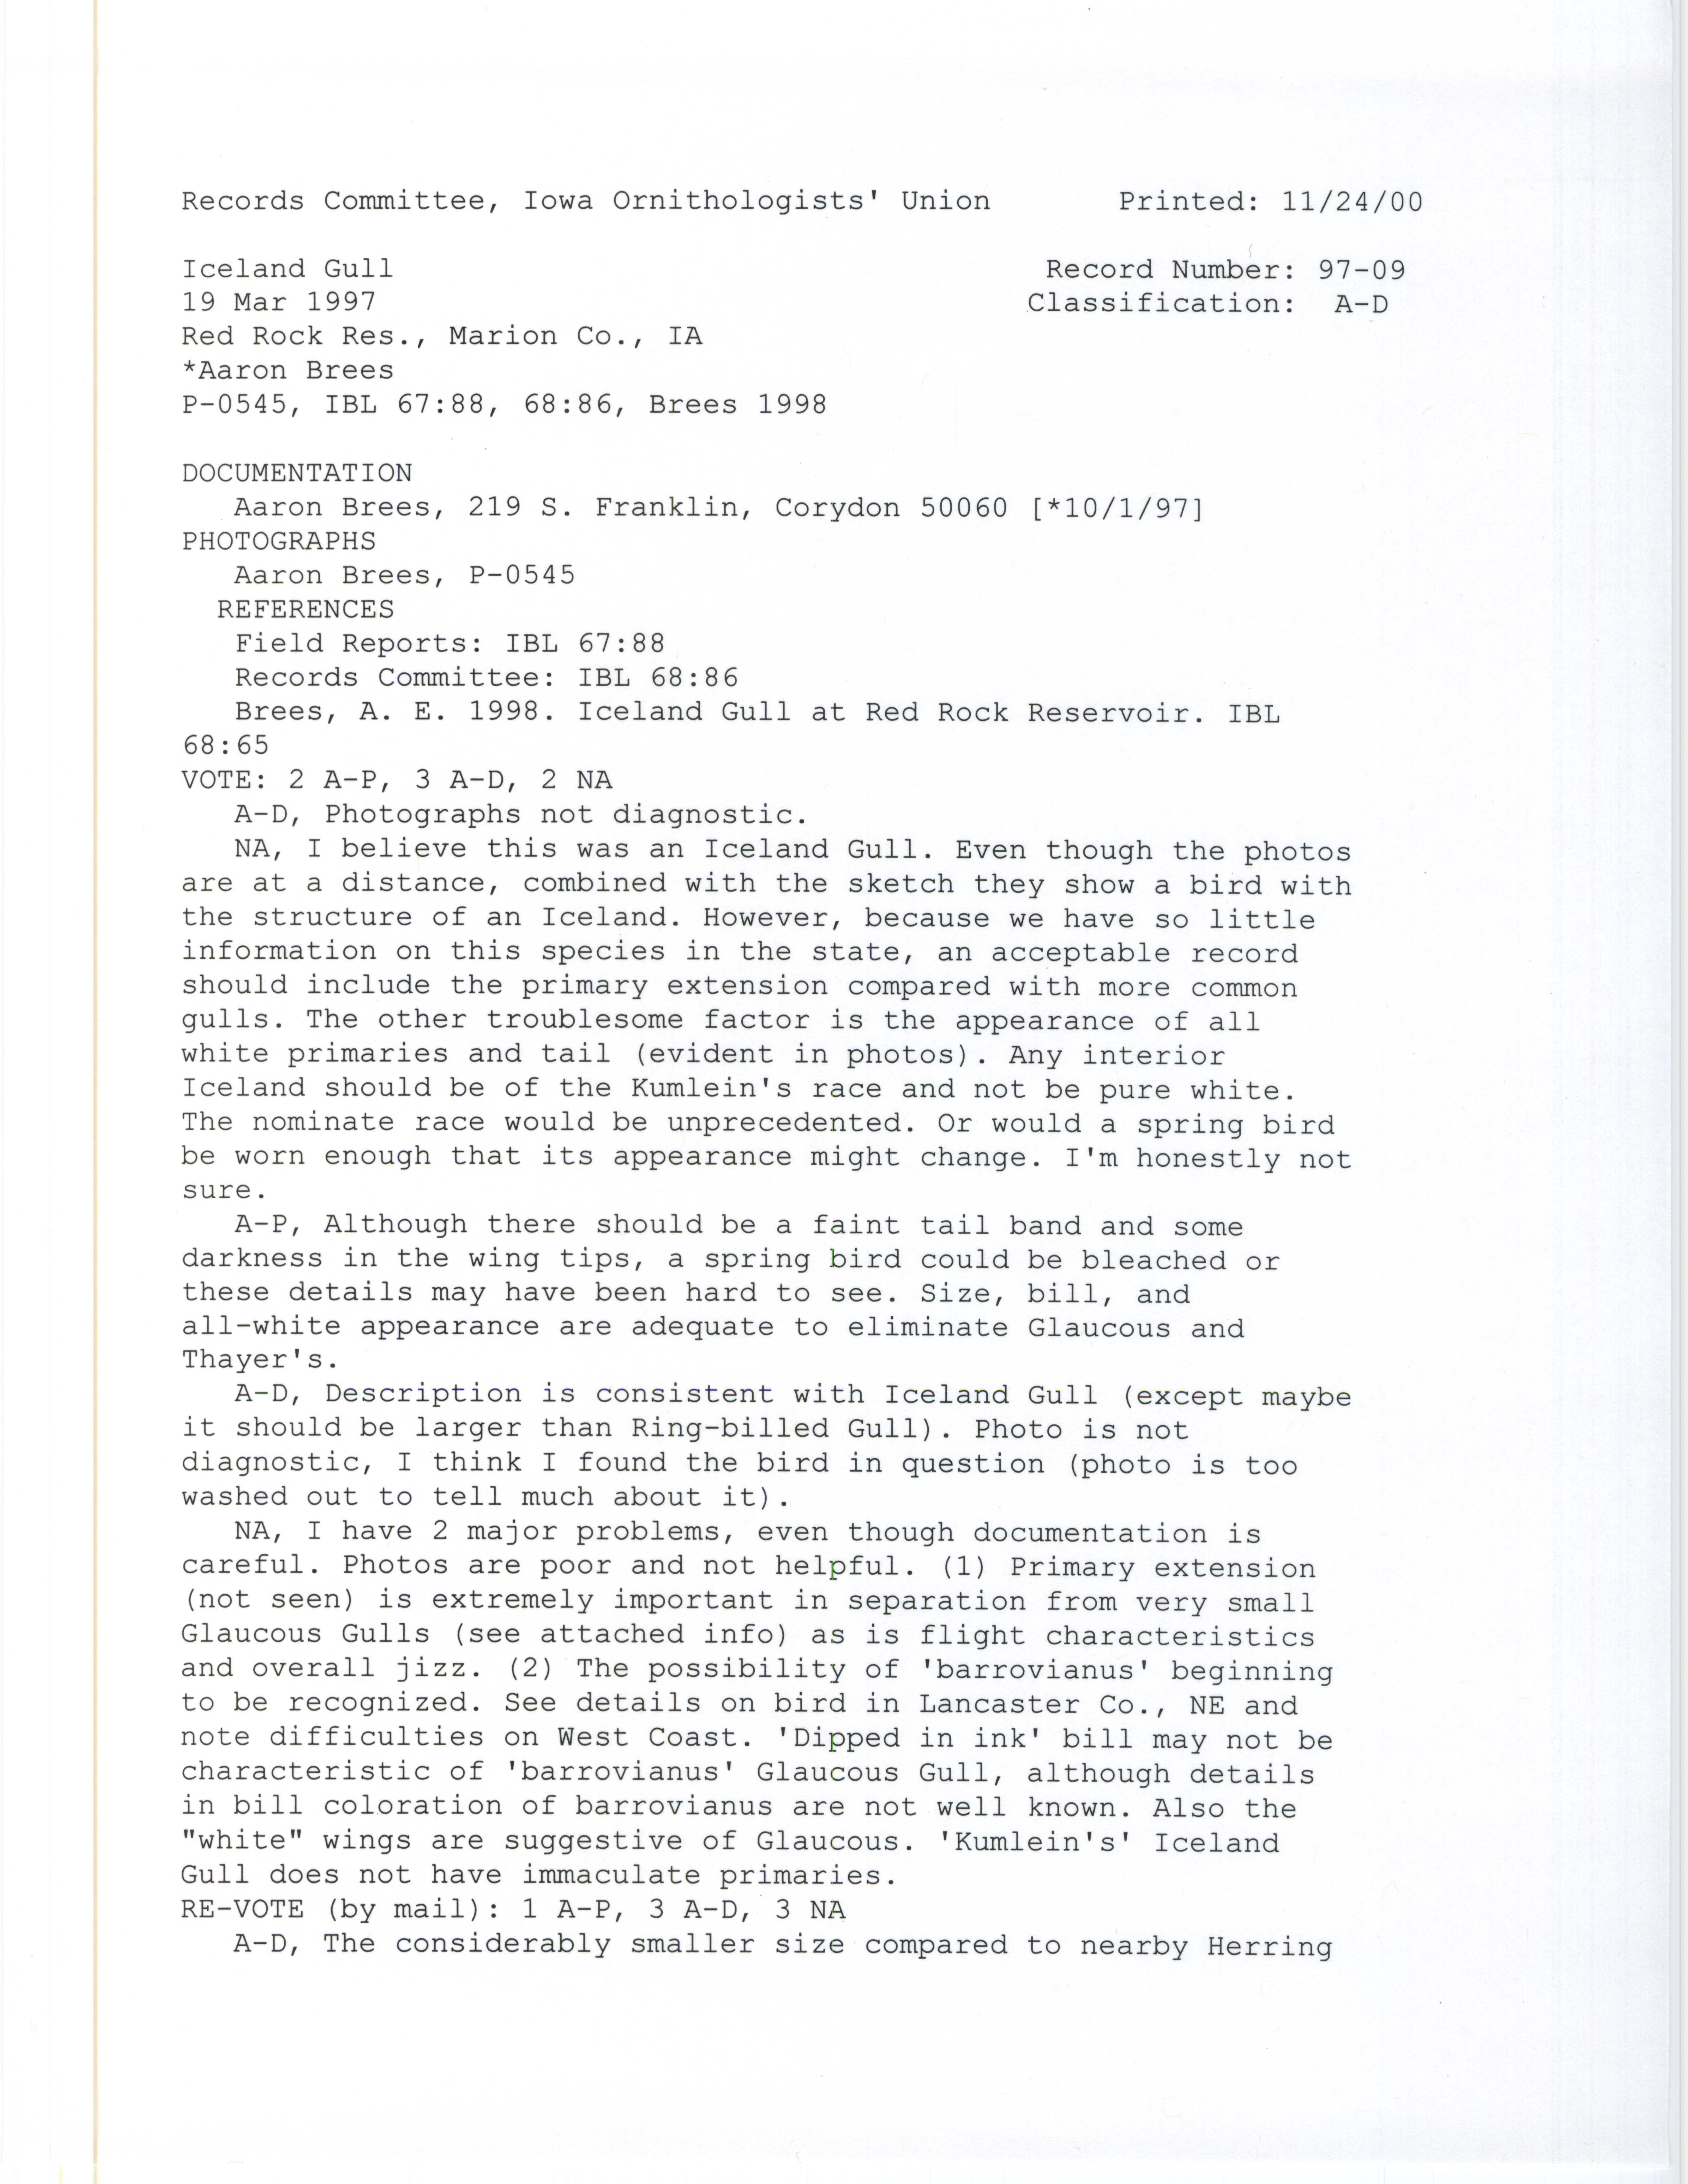 Records Committee review for rare bird sighting of Iceland Gull at Red Rock Reservoir Dam, 1997